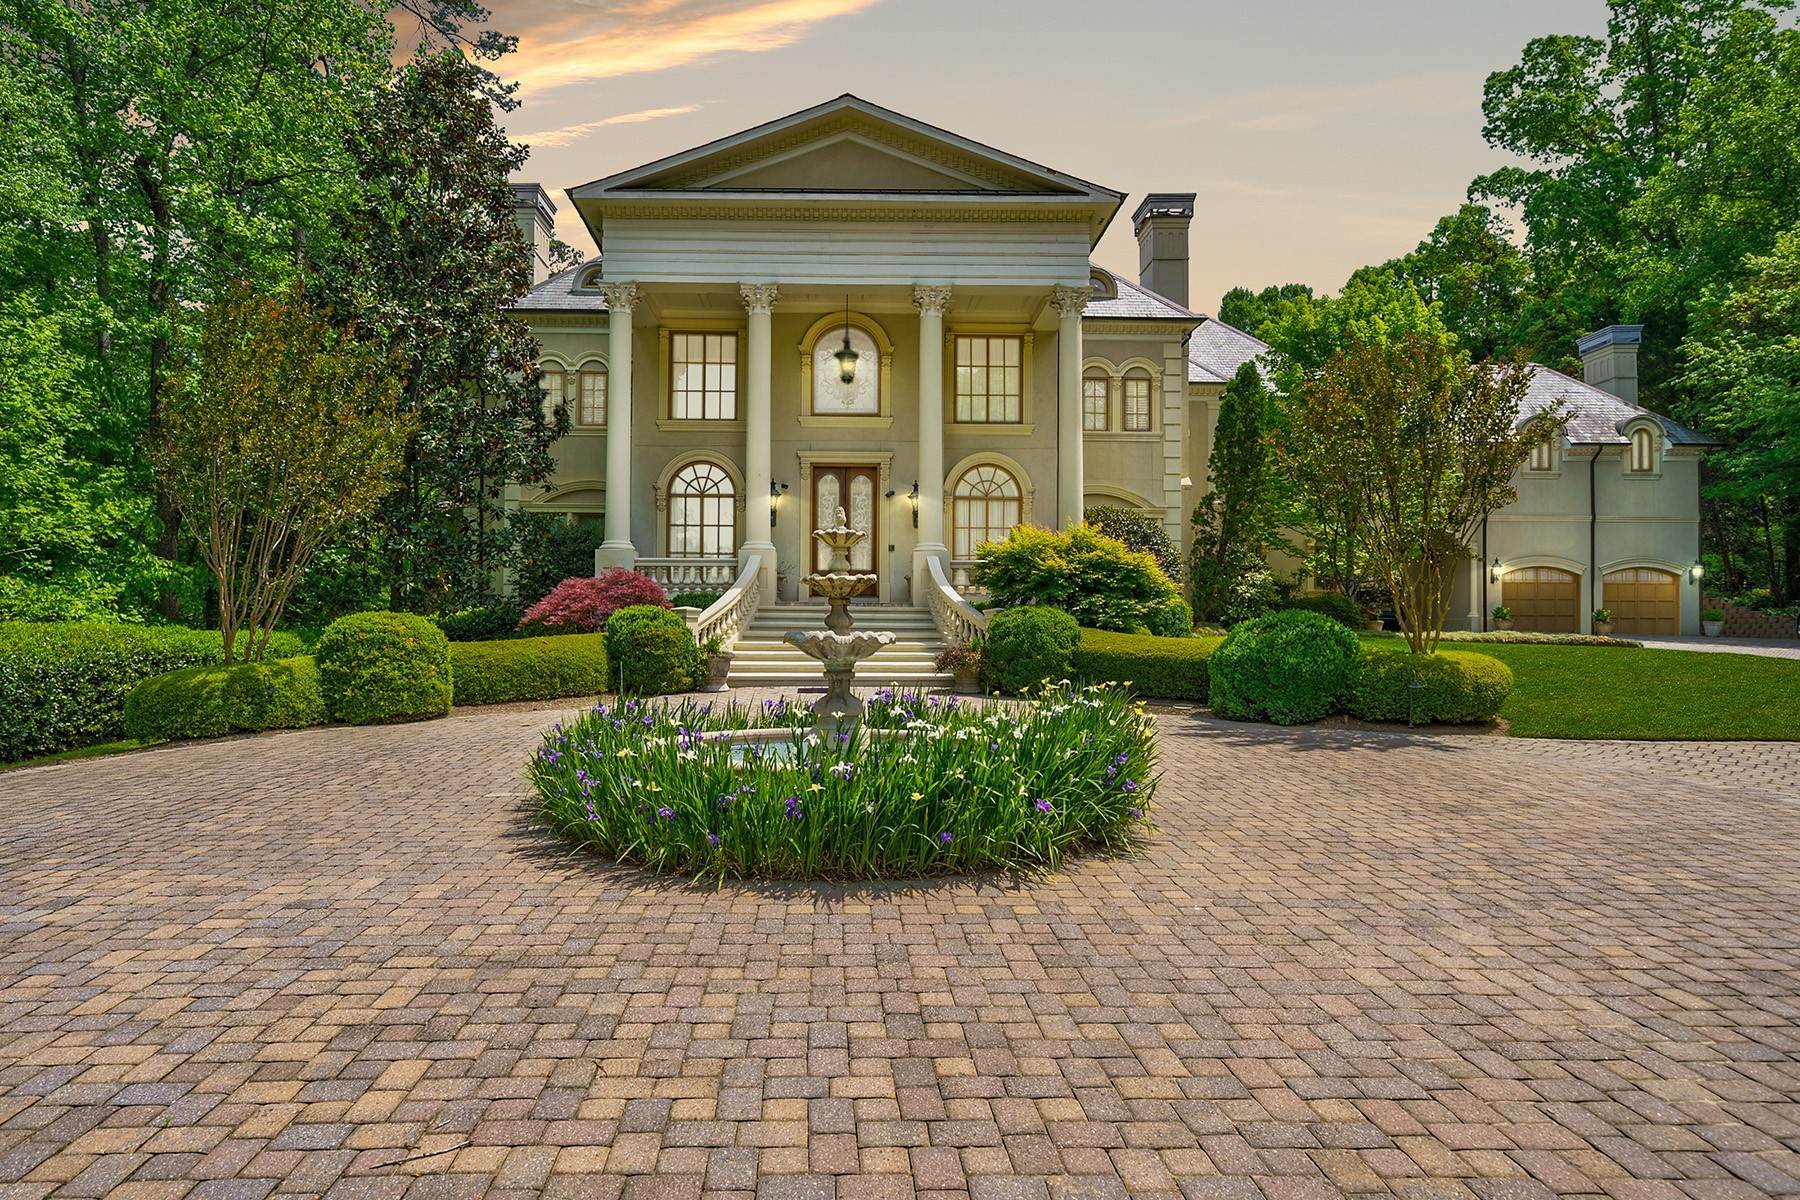 Single Family Homes for Sale at Private Gated Greek Revival-style Estate 4787 Northside Drive Atlanta, Georgia 30327 United States